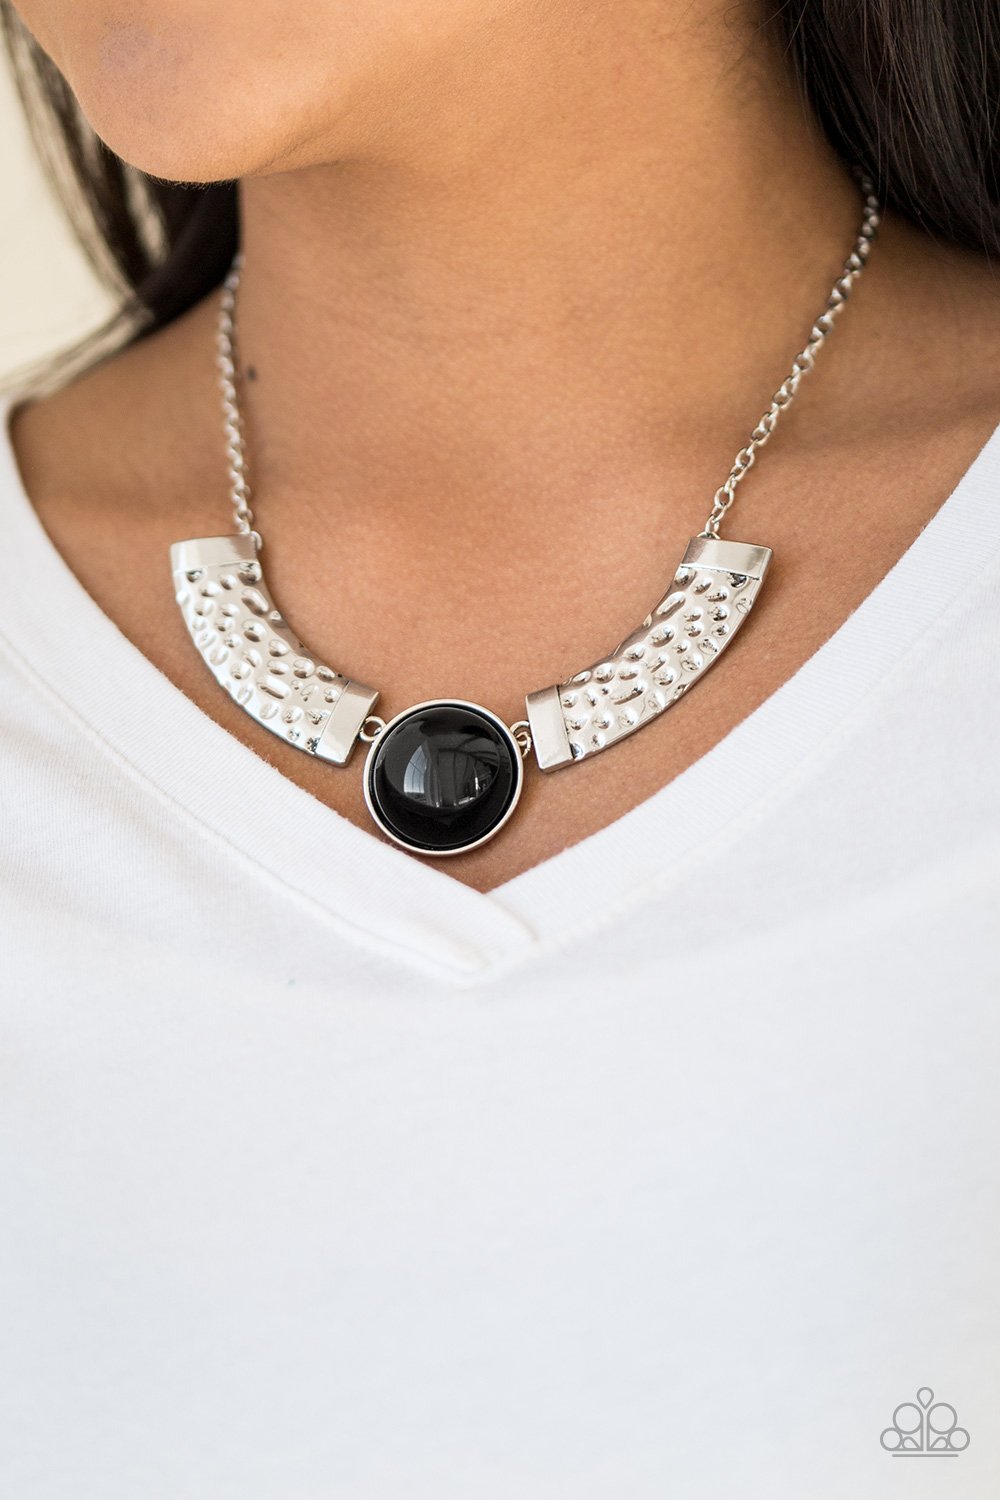 Paparazzi Accessories - Egyptian Spell - Black Necklace